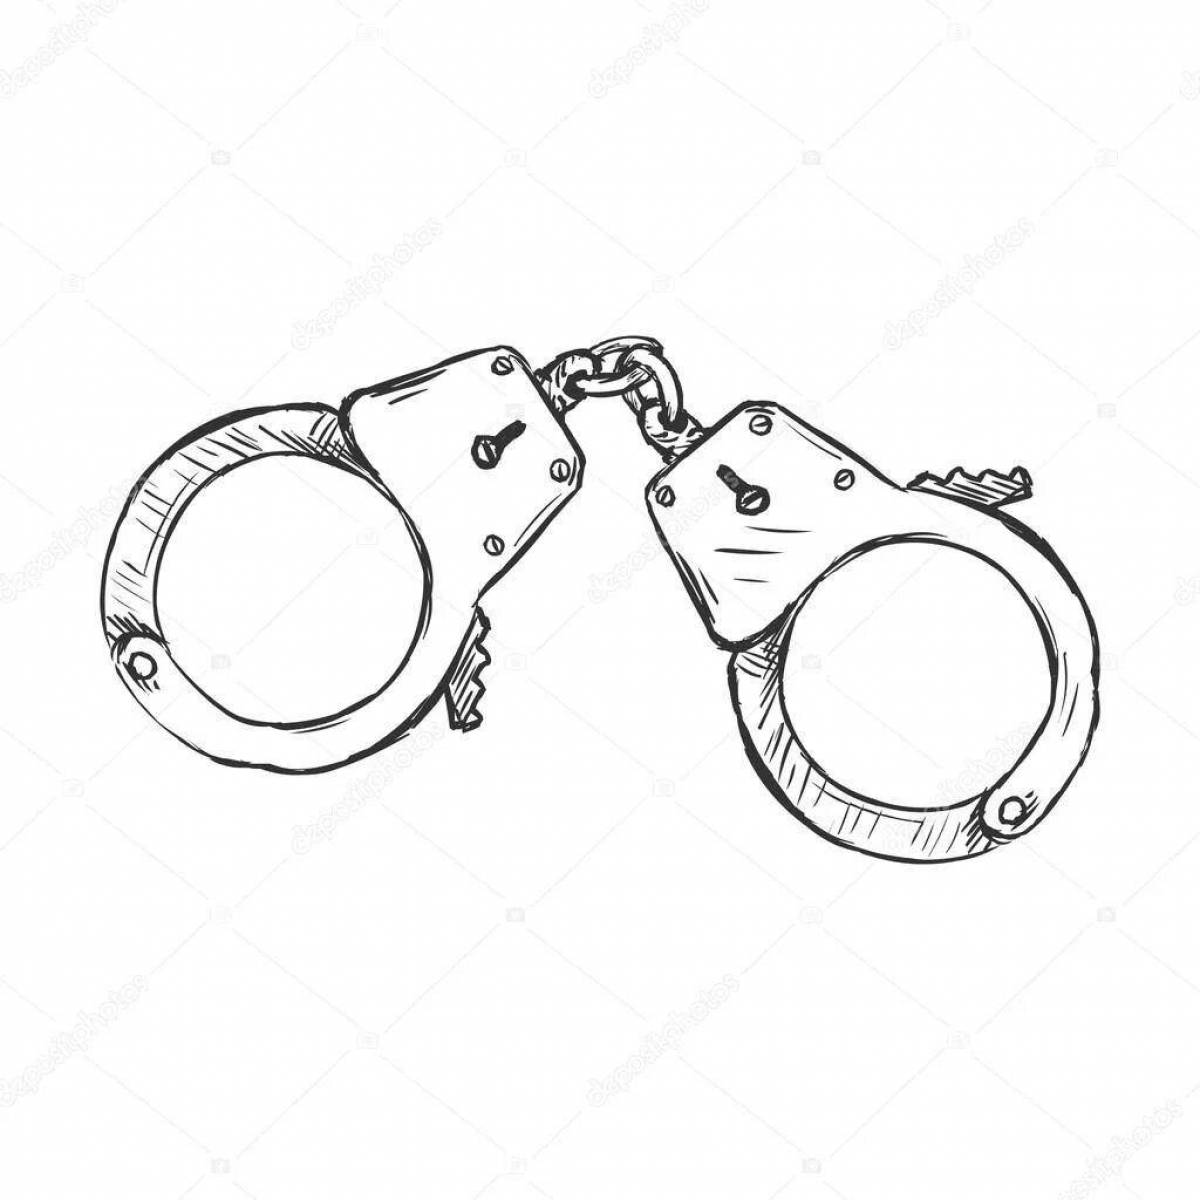 Intricate handcuffs coloring page